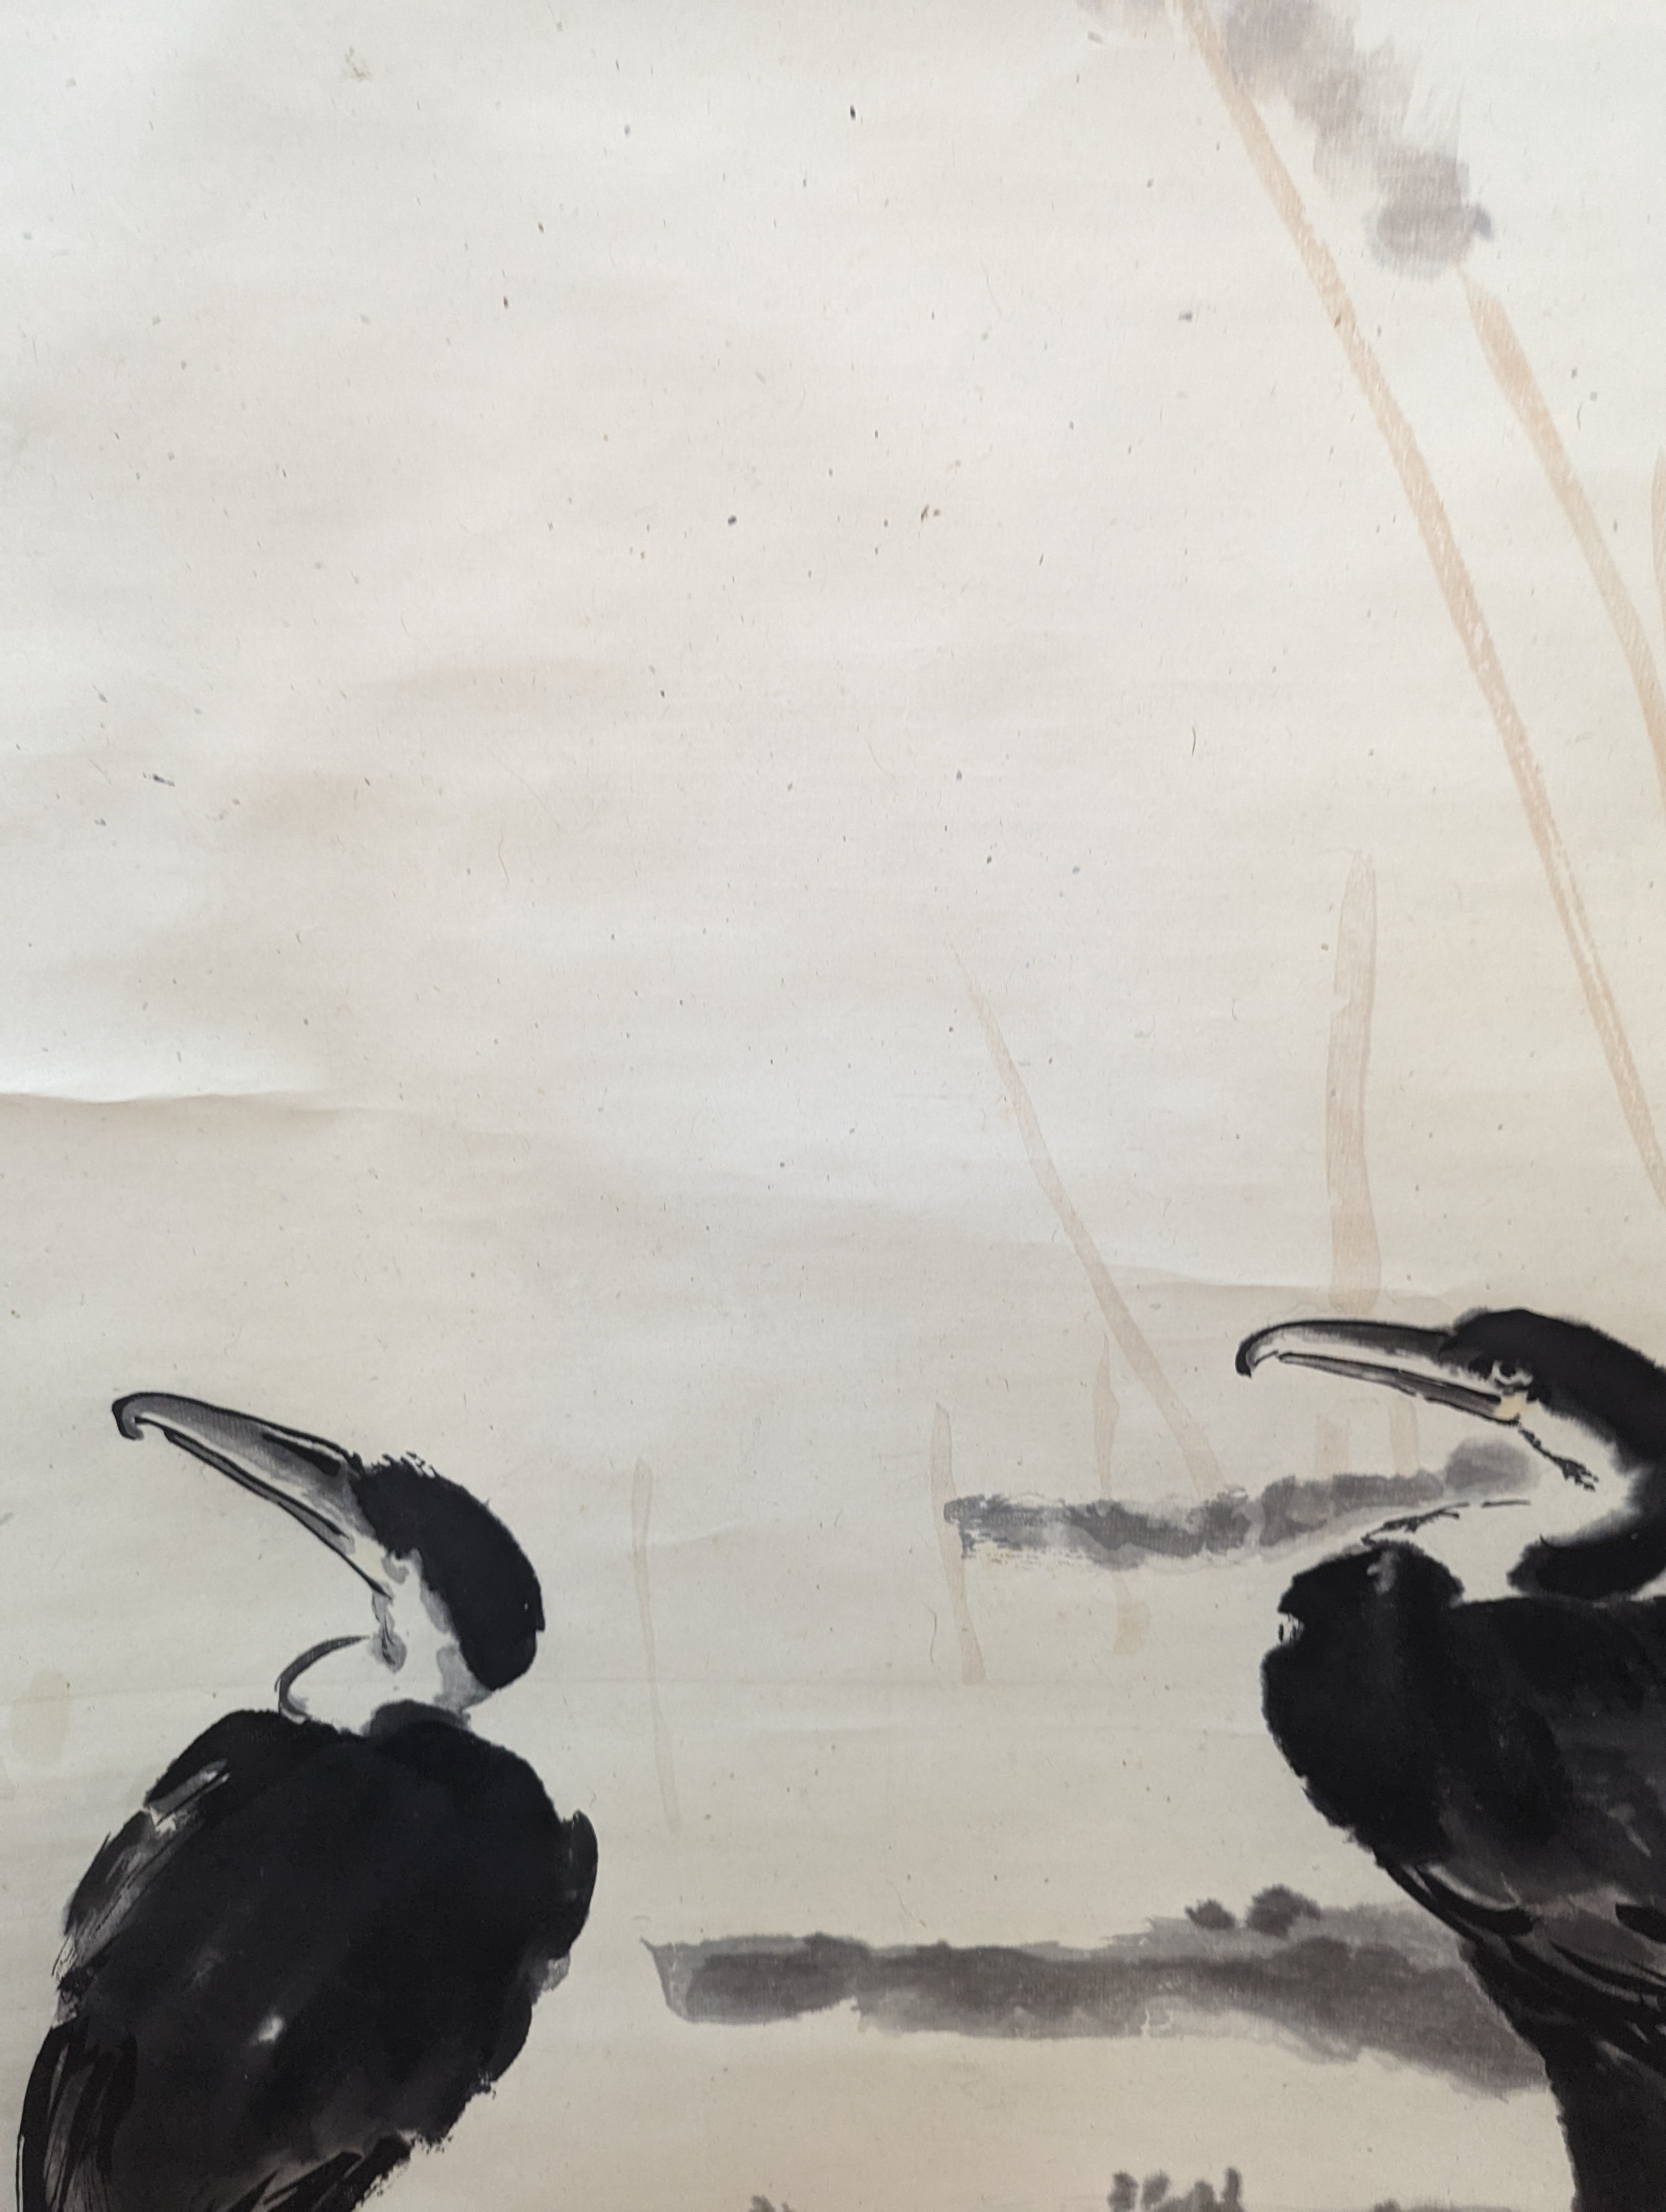 Two mid 20th century Japanese watercolour on paper scroll paintings, Boatman in a landscape, 79.5 x 113cm, and Cormorants on a bank, 103 x 106cm